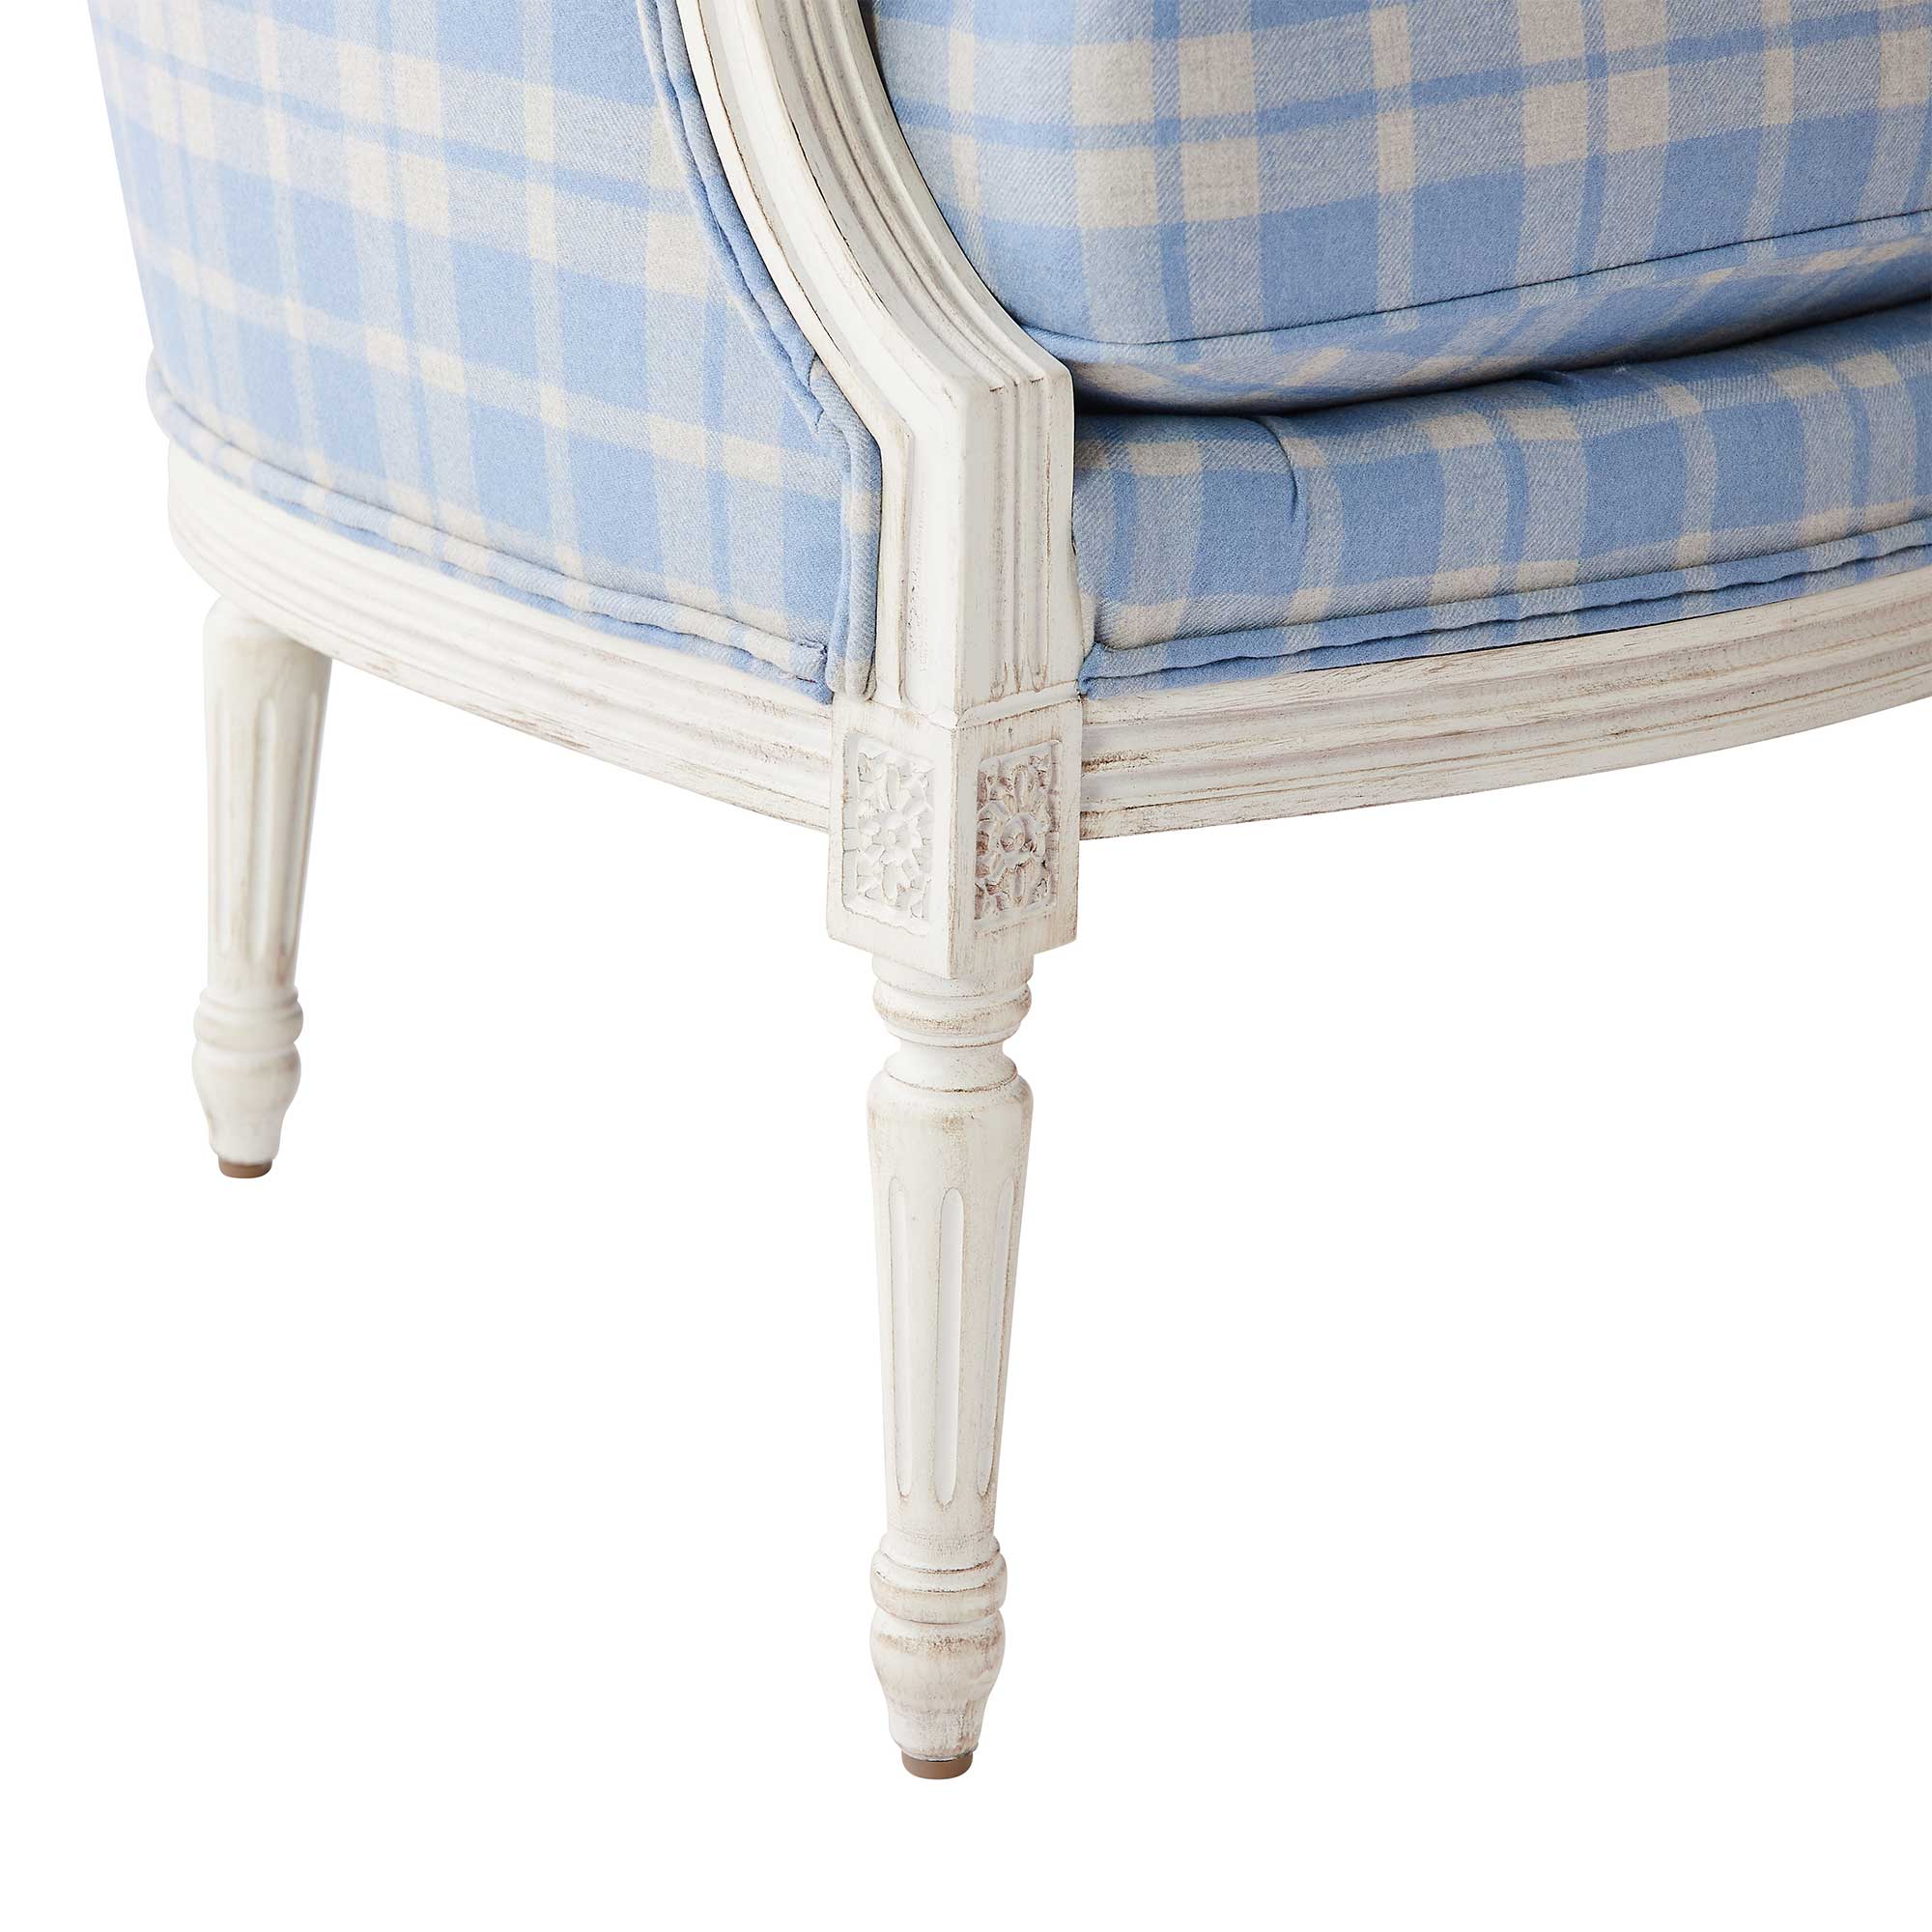 Carved Legs on Adele Lounge Chair in Blue Plaid